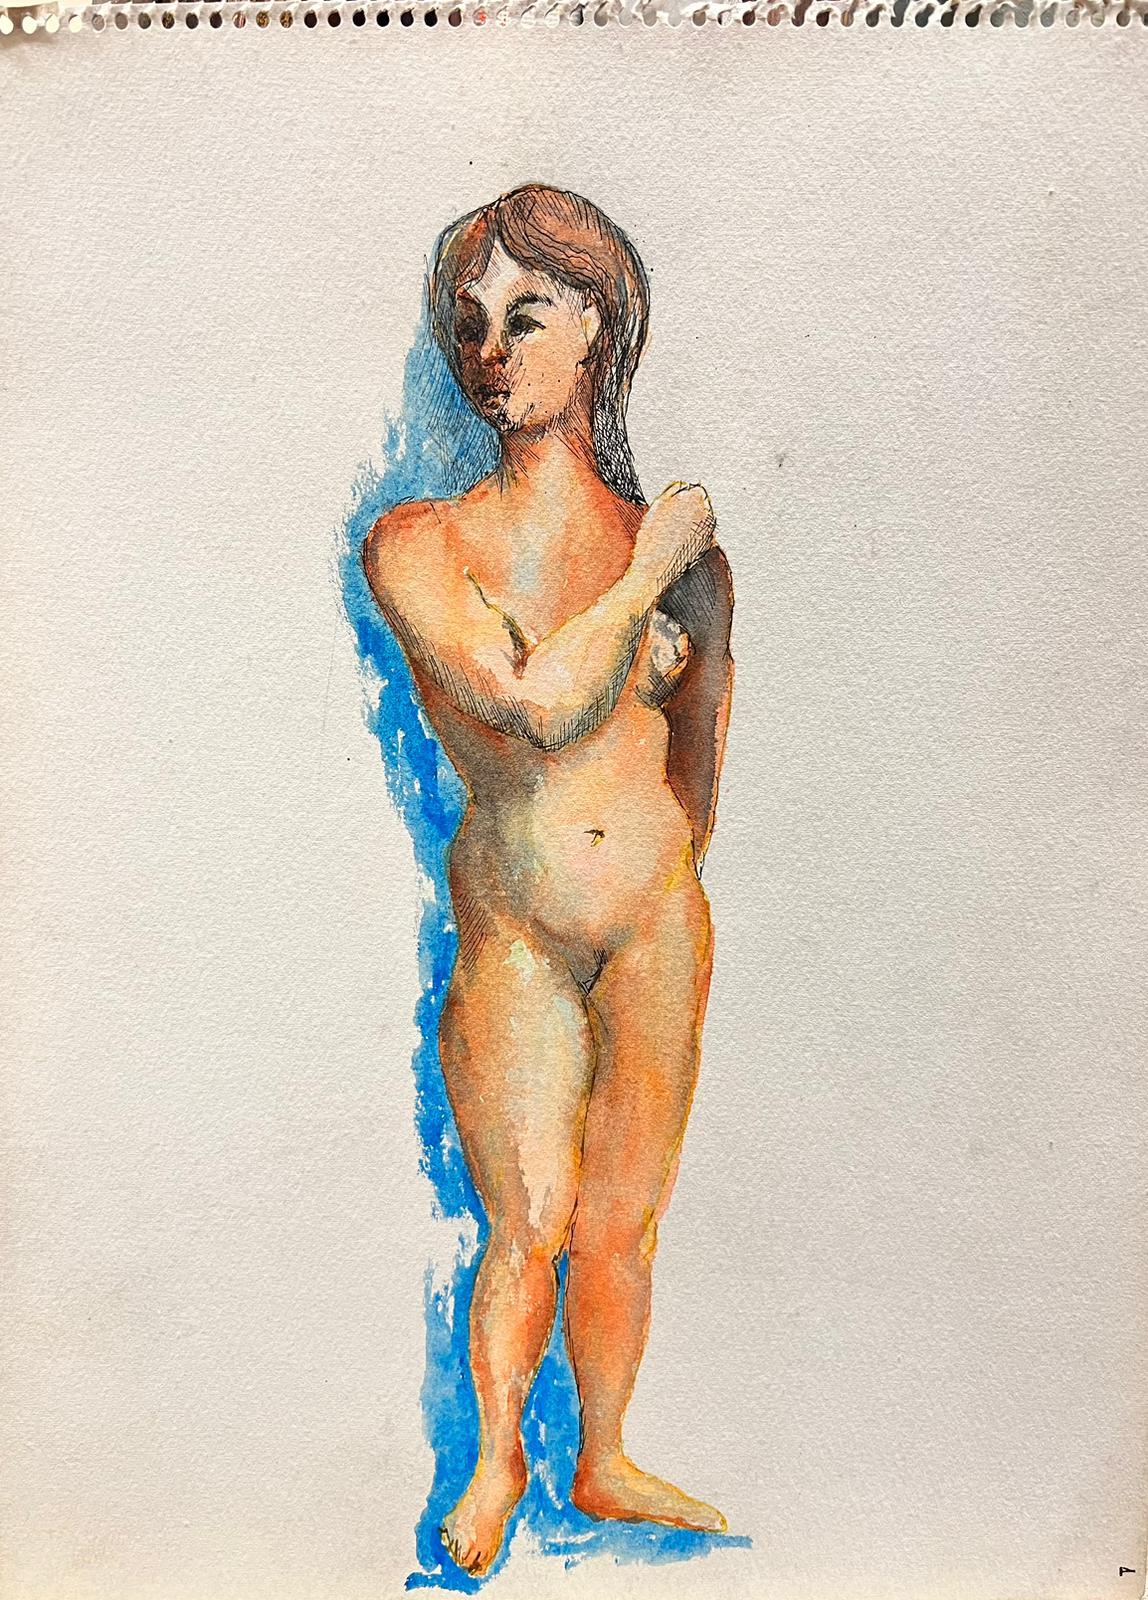 French Nude
by Bernard Labbe (French mid 20th century)
original gouache on paper
size: 14 x 10.5 inches
condition: very good and ready to be enjoyed

provenance: the artists atelier/ studio, France (stamped verso)